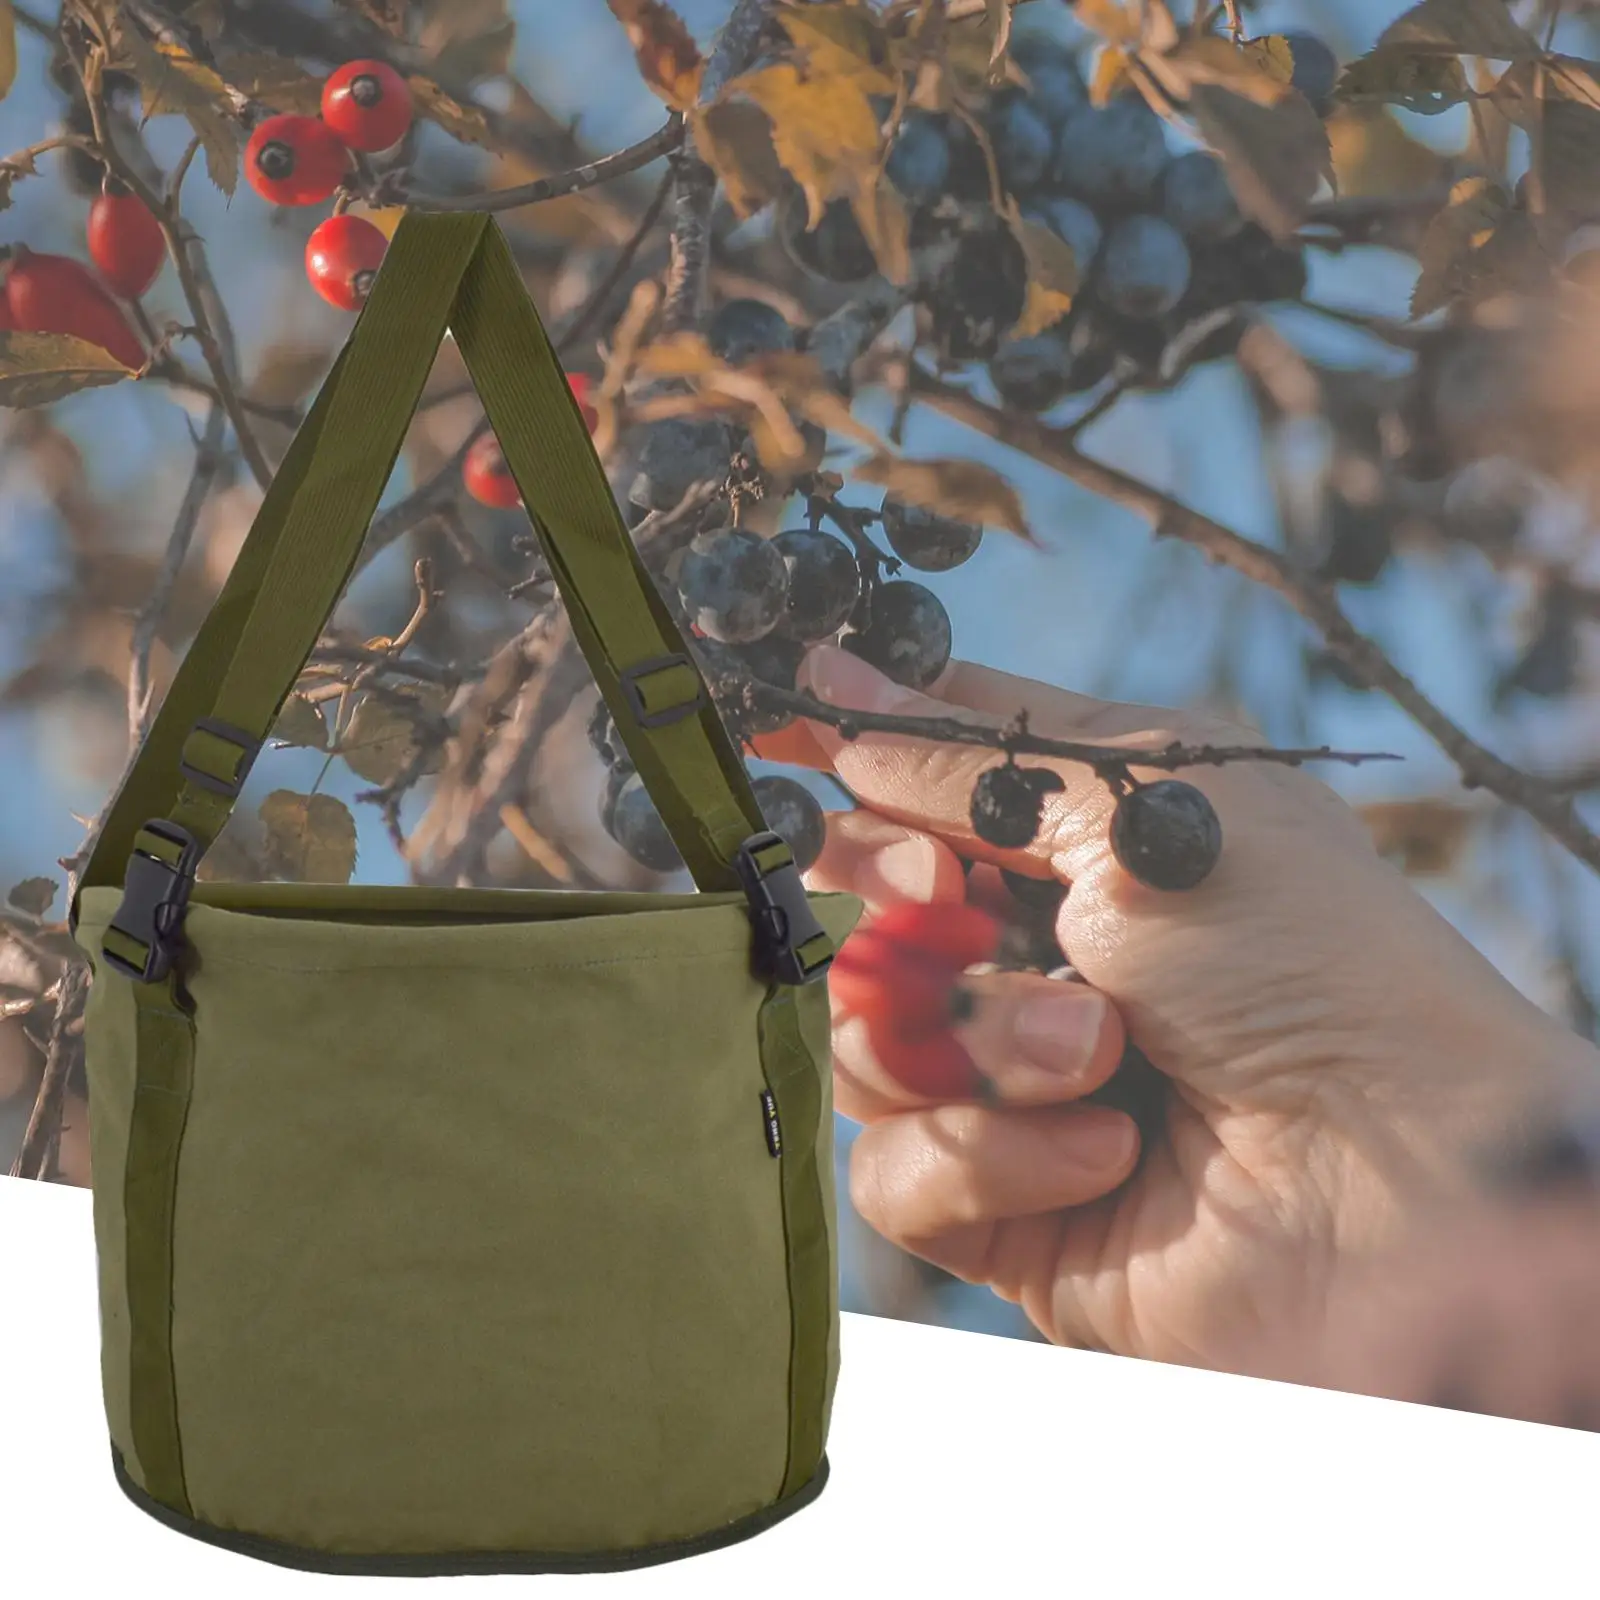 Fruit Picking Bag, Foraging Bag Multi Function Canvas Storage Pouch for Harvesting Cherry 